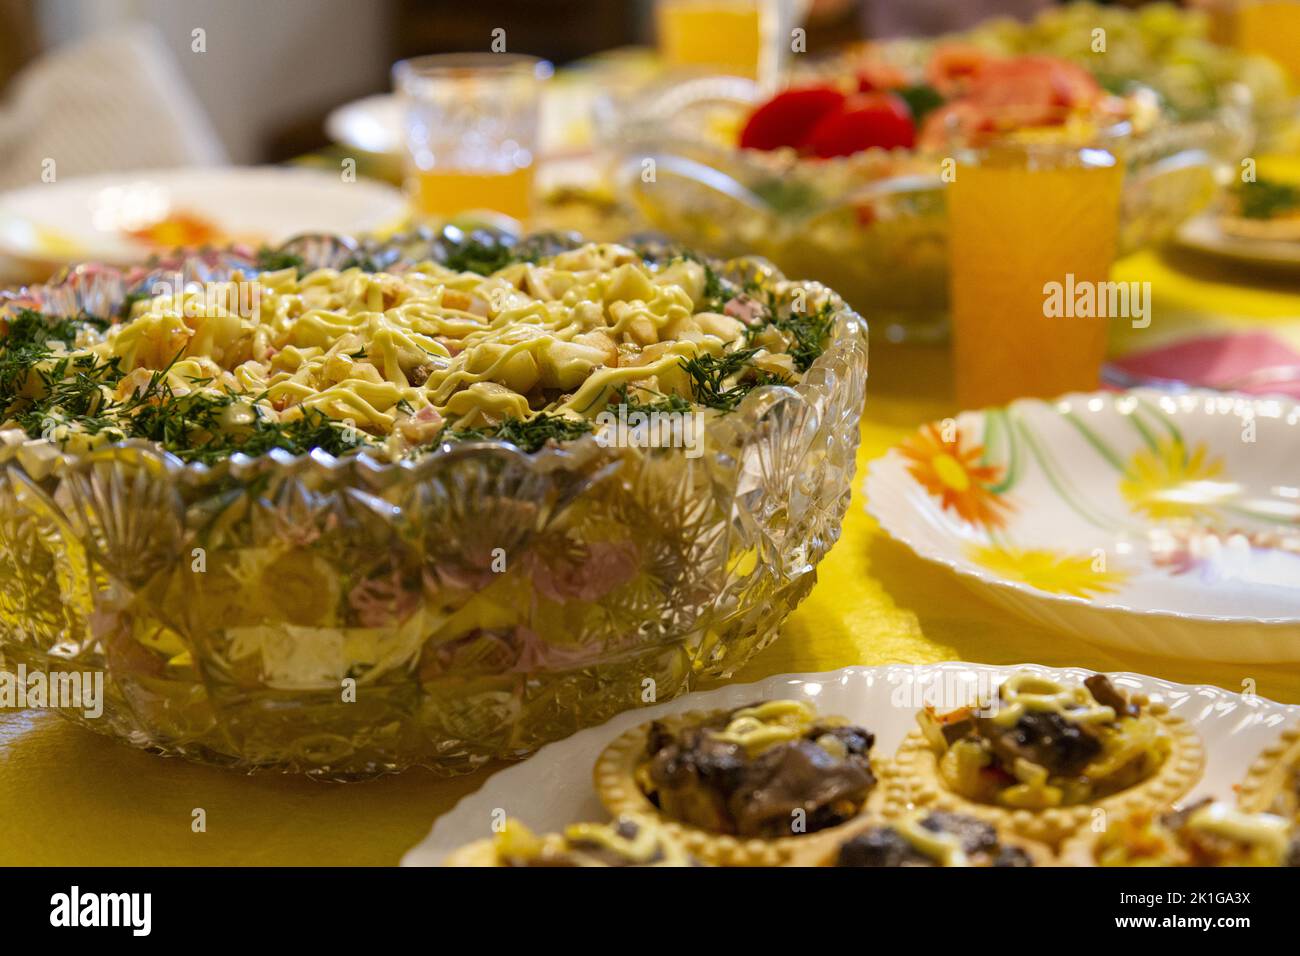 Authentic made at home family holiday dinner. Stock Photo